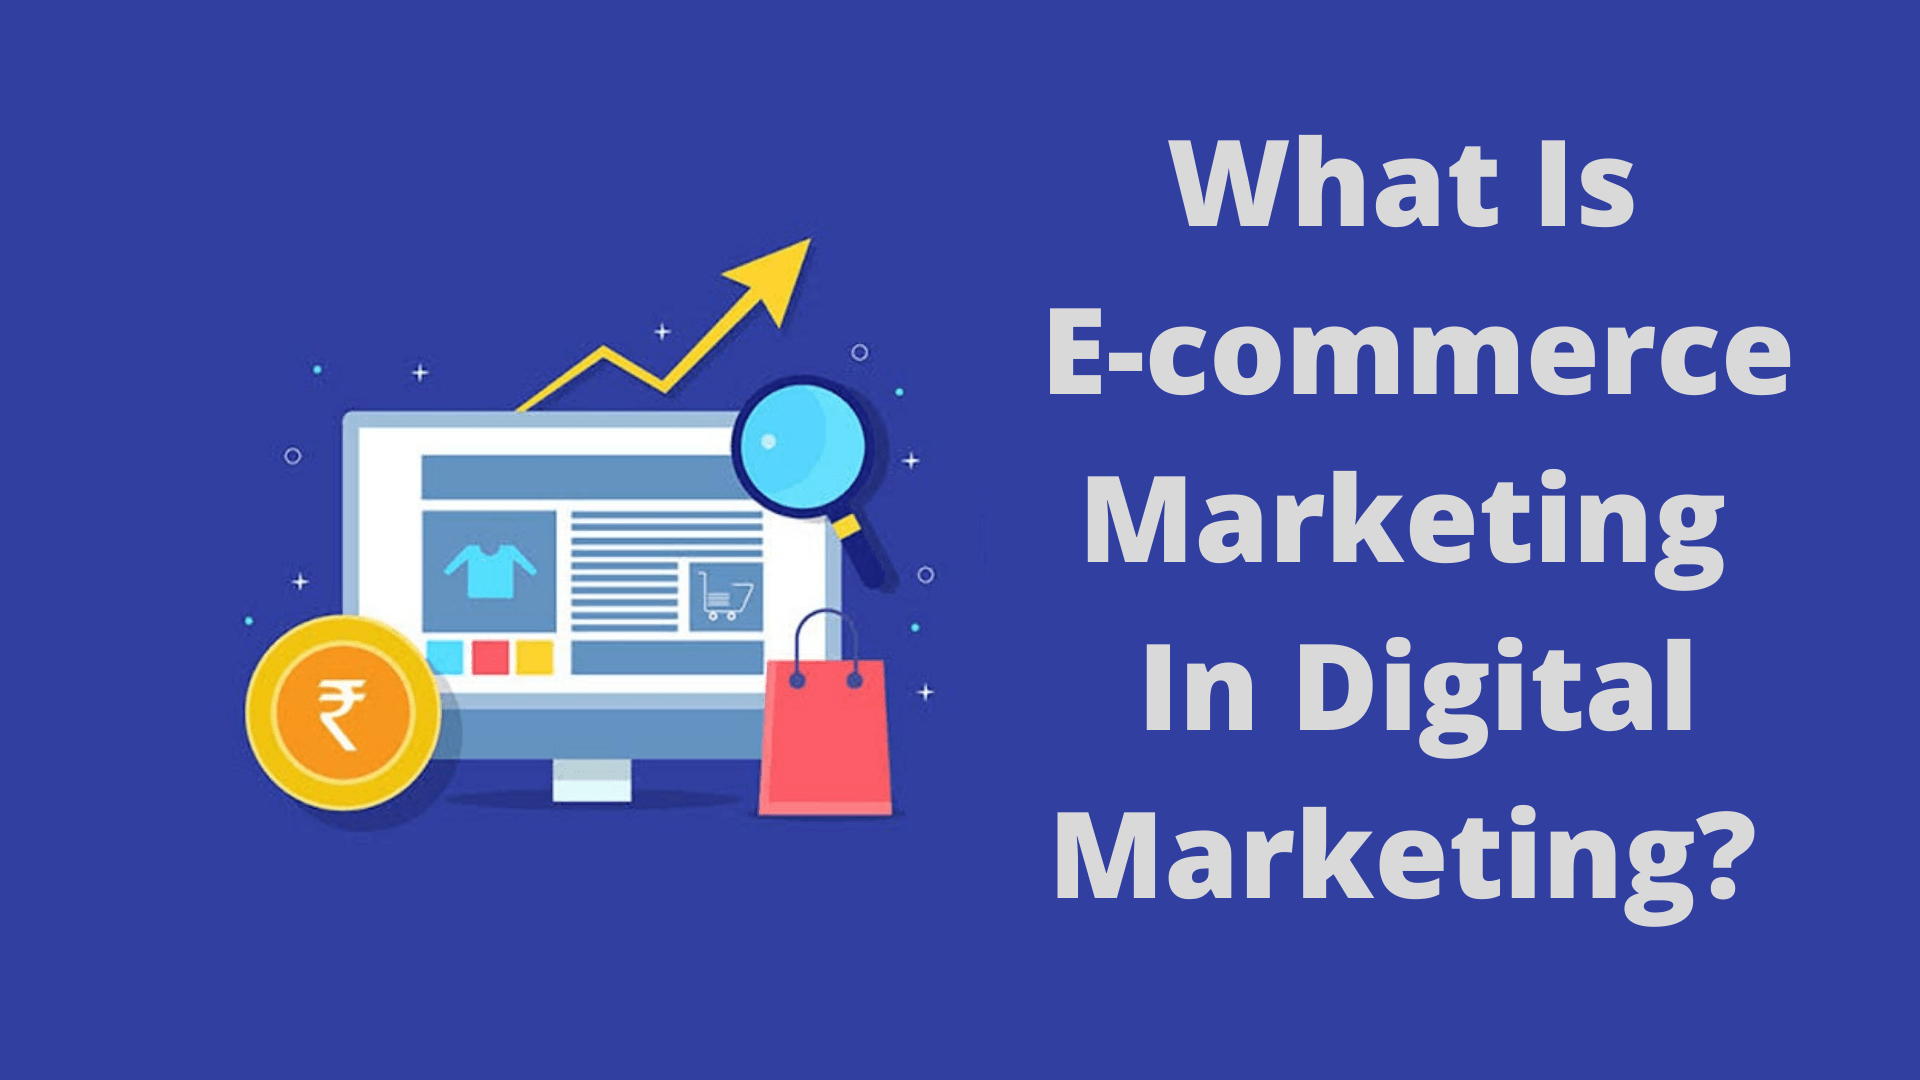 What Is E-commerce Marketing